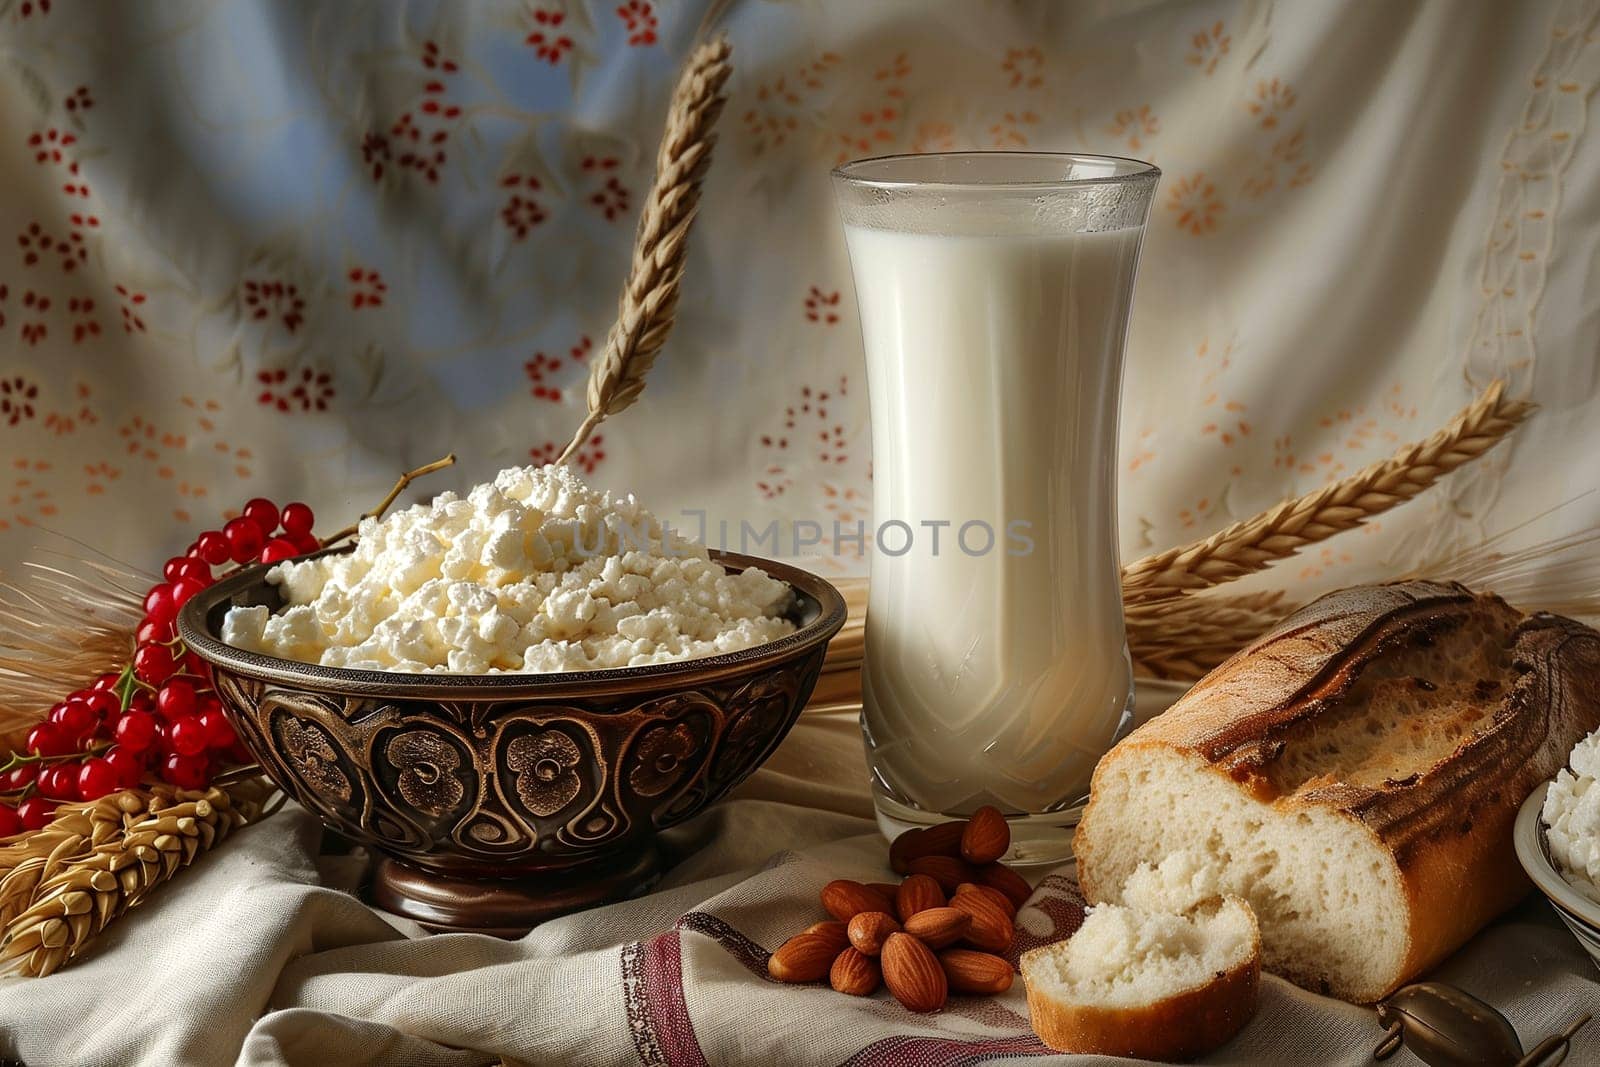 A table is set with a bowl of food and a glass of milk, ready to be enjoyed.